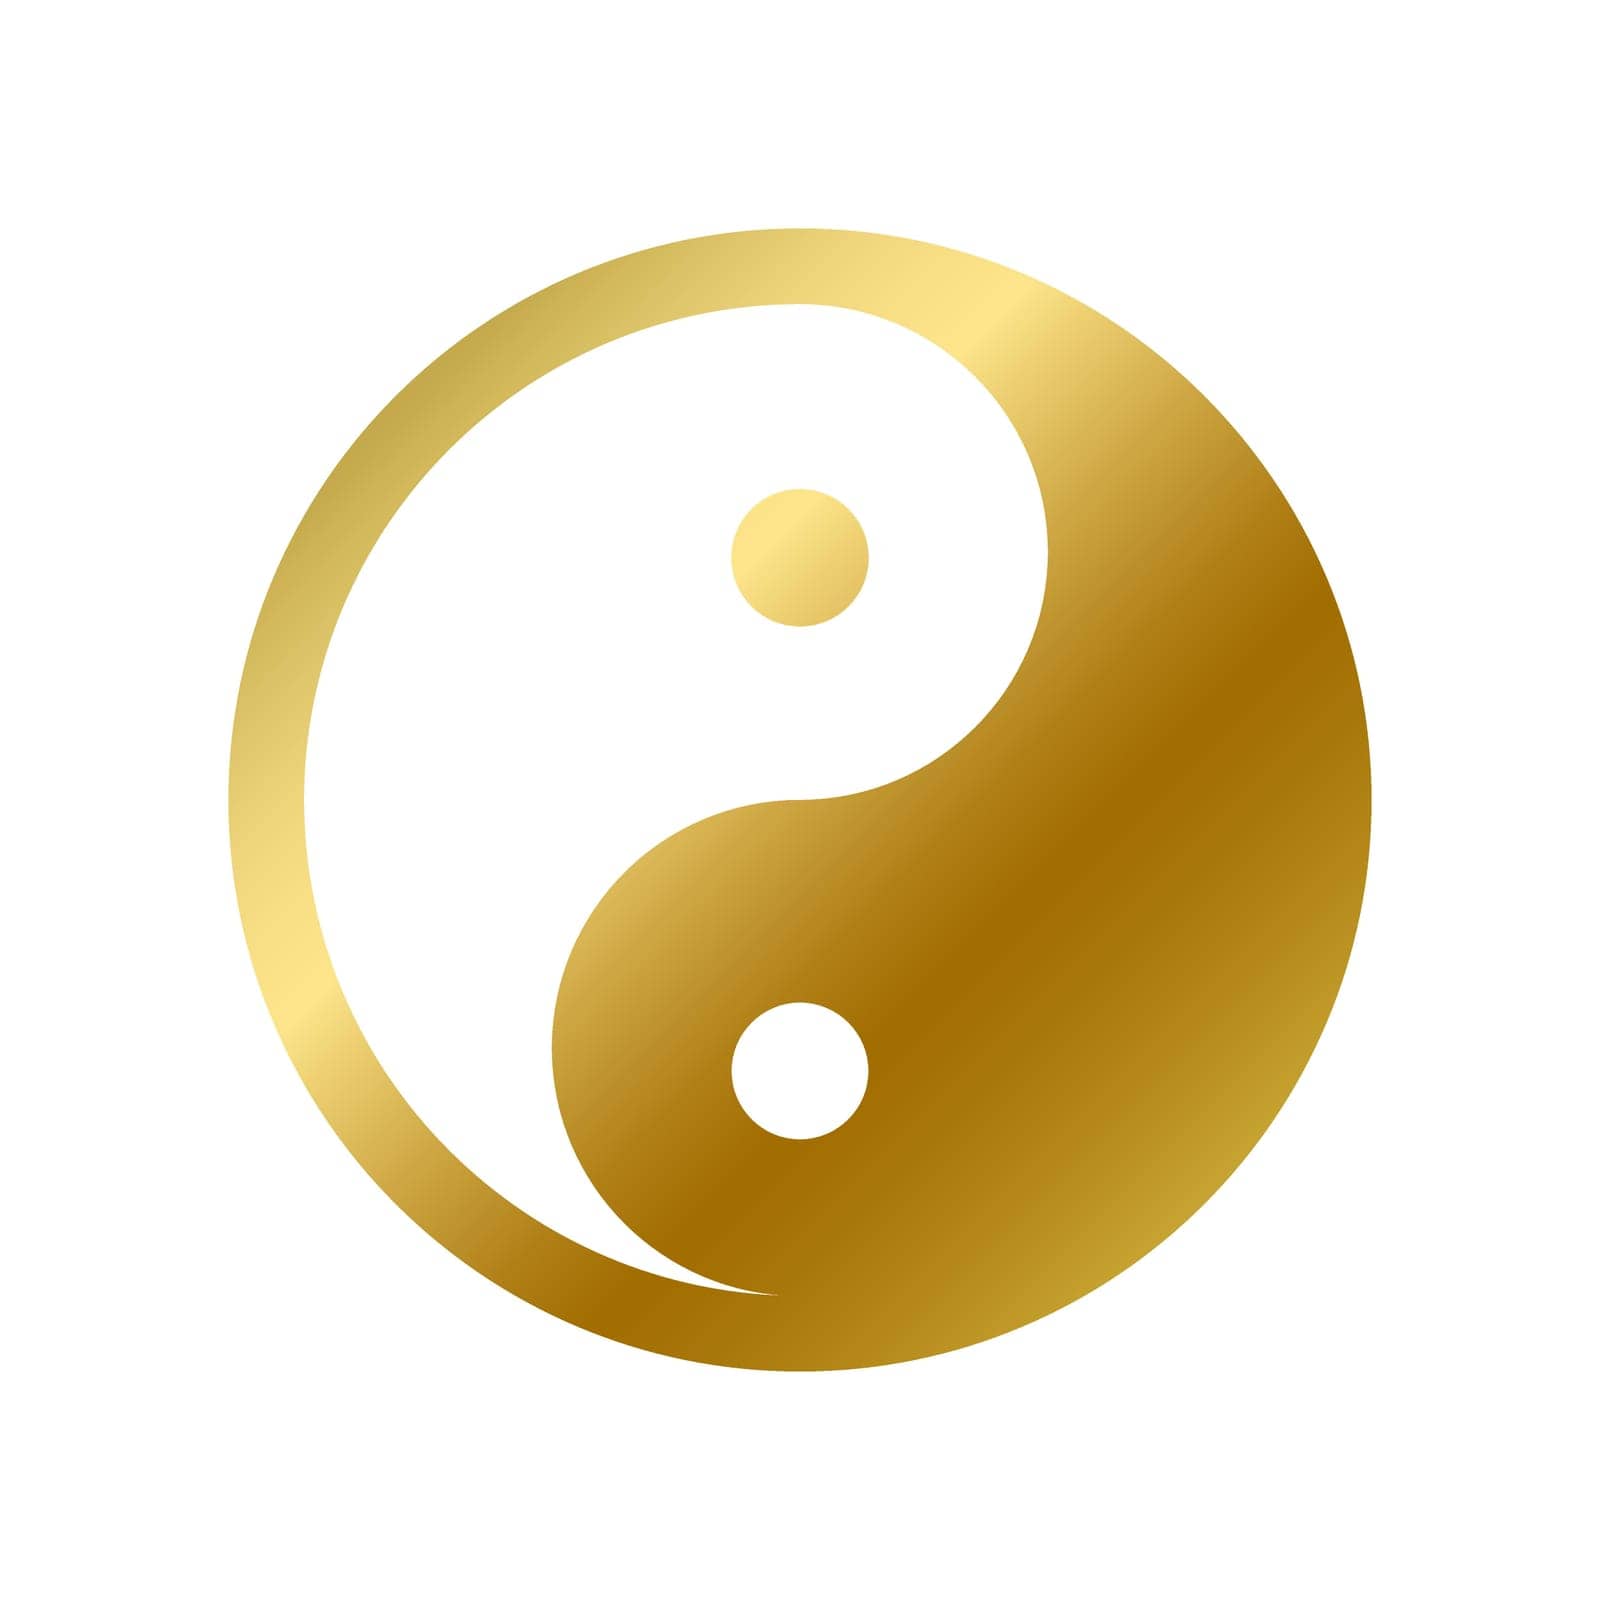 Yin yang symbol isolated. Daoism, taoism religious golden sign on white background vector design illustration. Oriental gold tao ying yang. Religion and faith concept